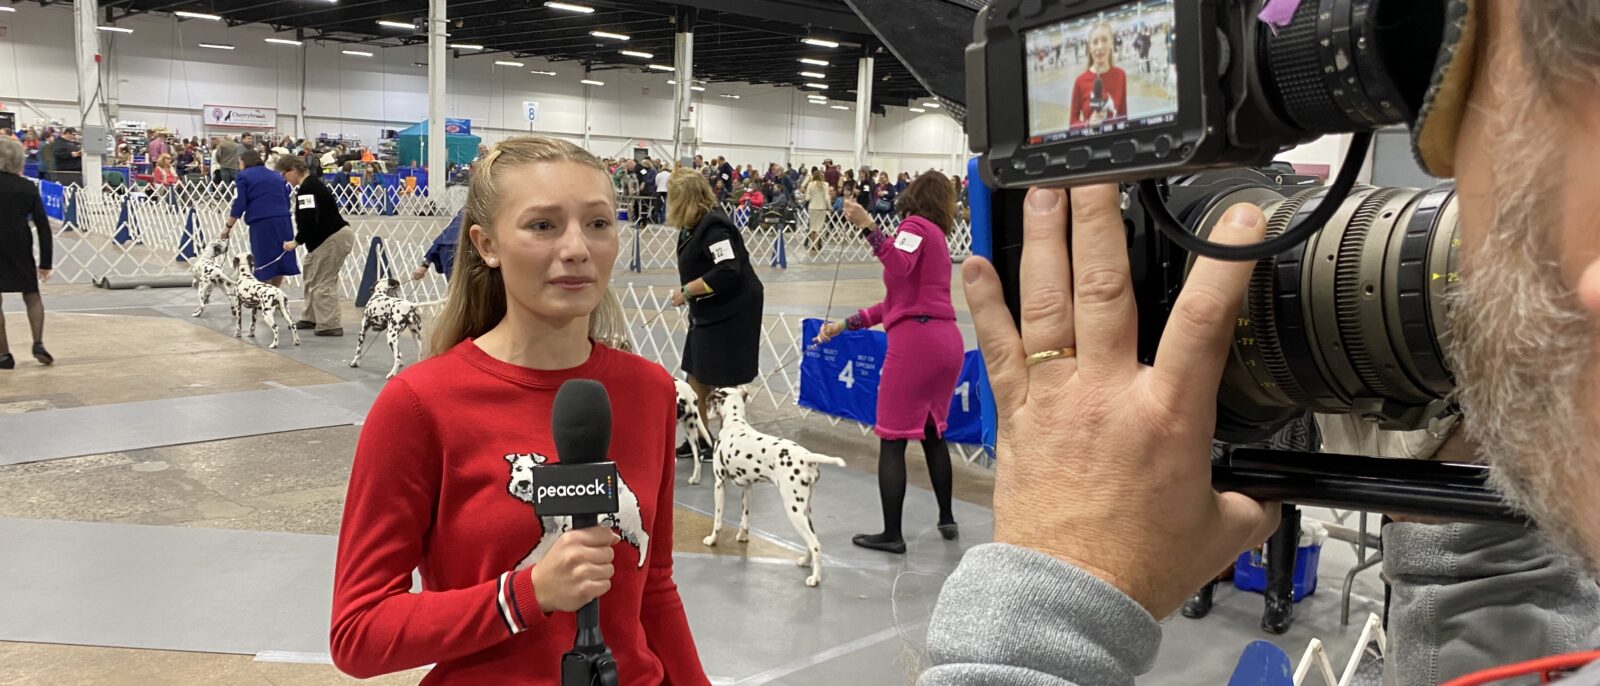 A teenager in a red shirt holds a microphone in front of a video camera in a room filled with dogs.